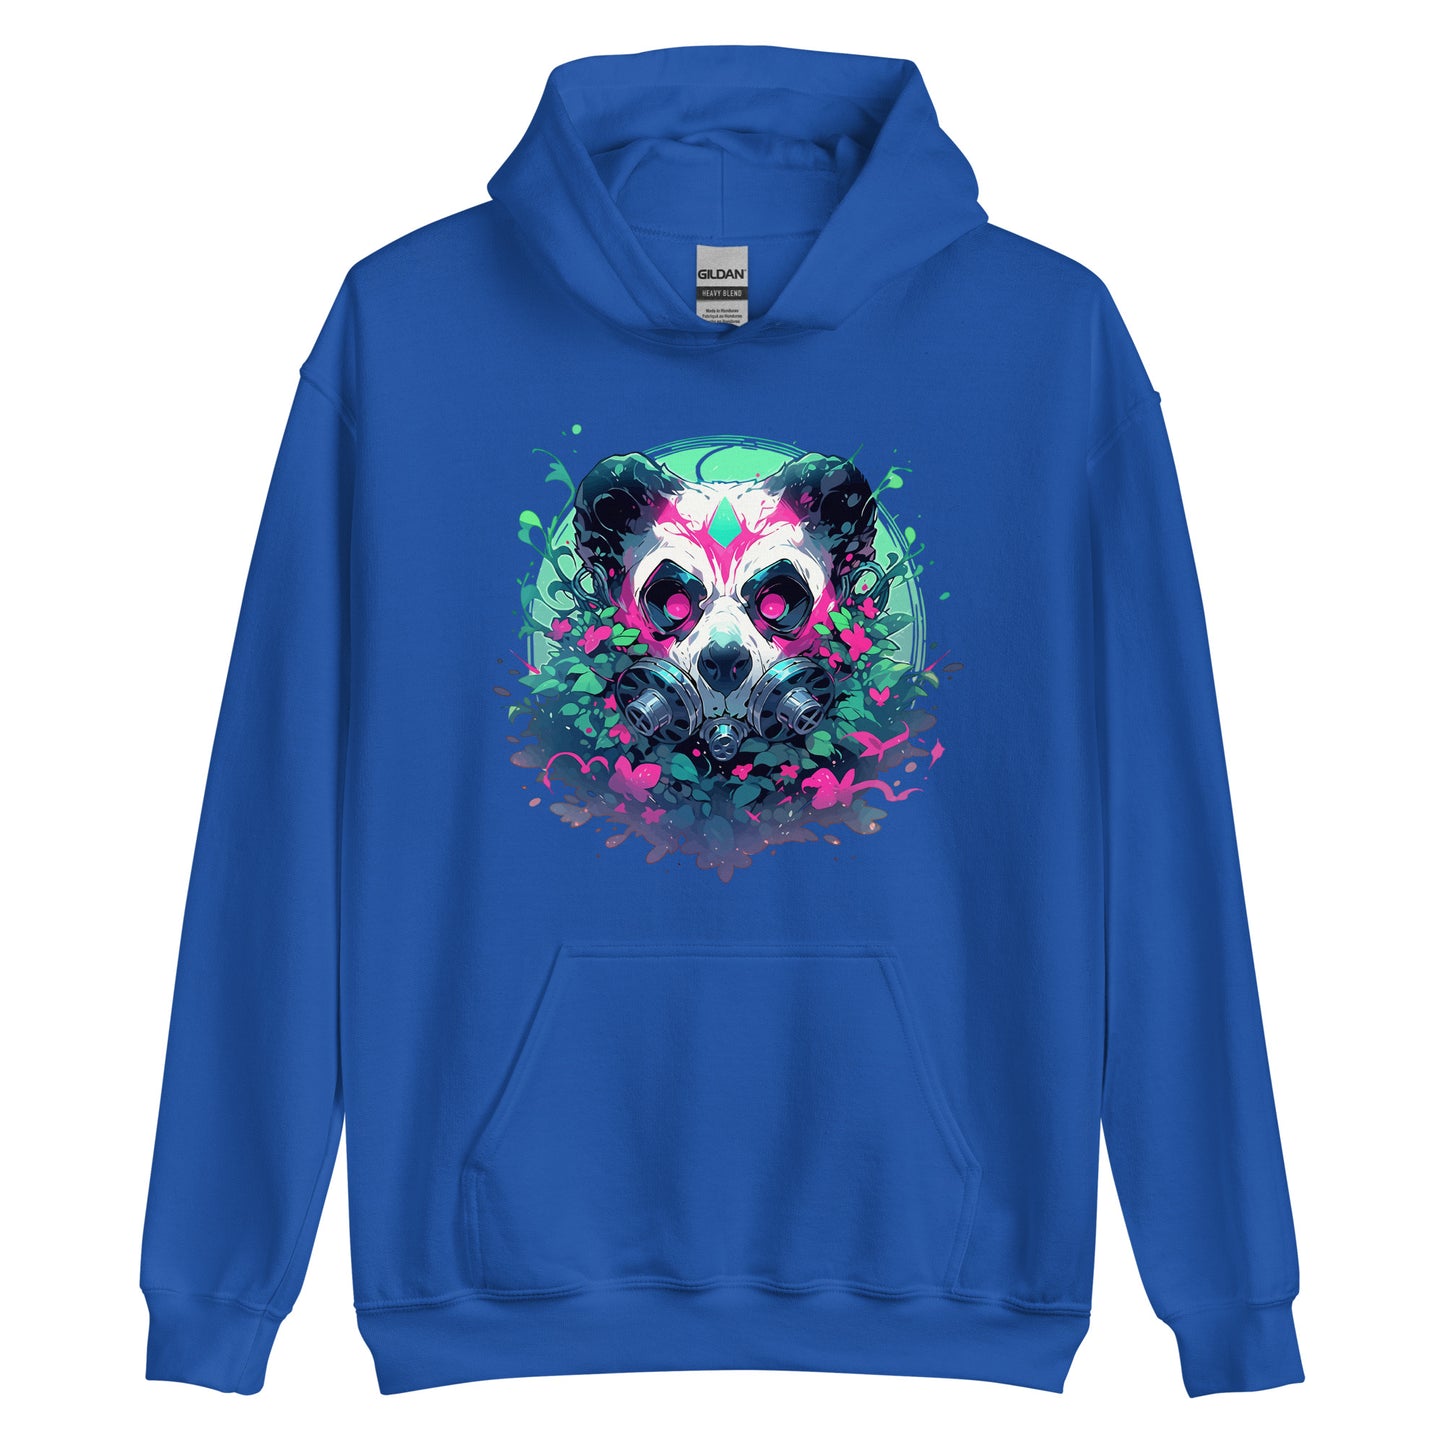 Cool toxic panda, Post-apocalyptic jungle, Wild animal with pink eyes, Bamboo bear in gas mask, Black and white bear - Unisex Hoodie